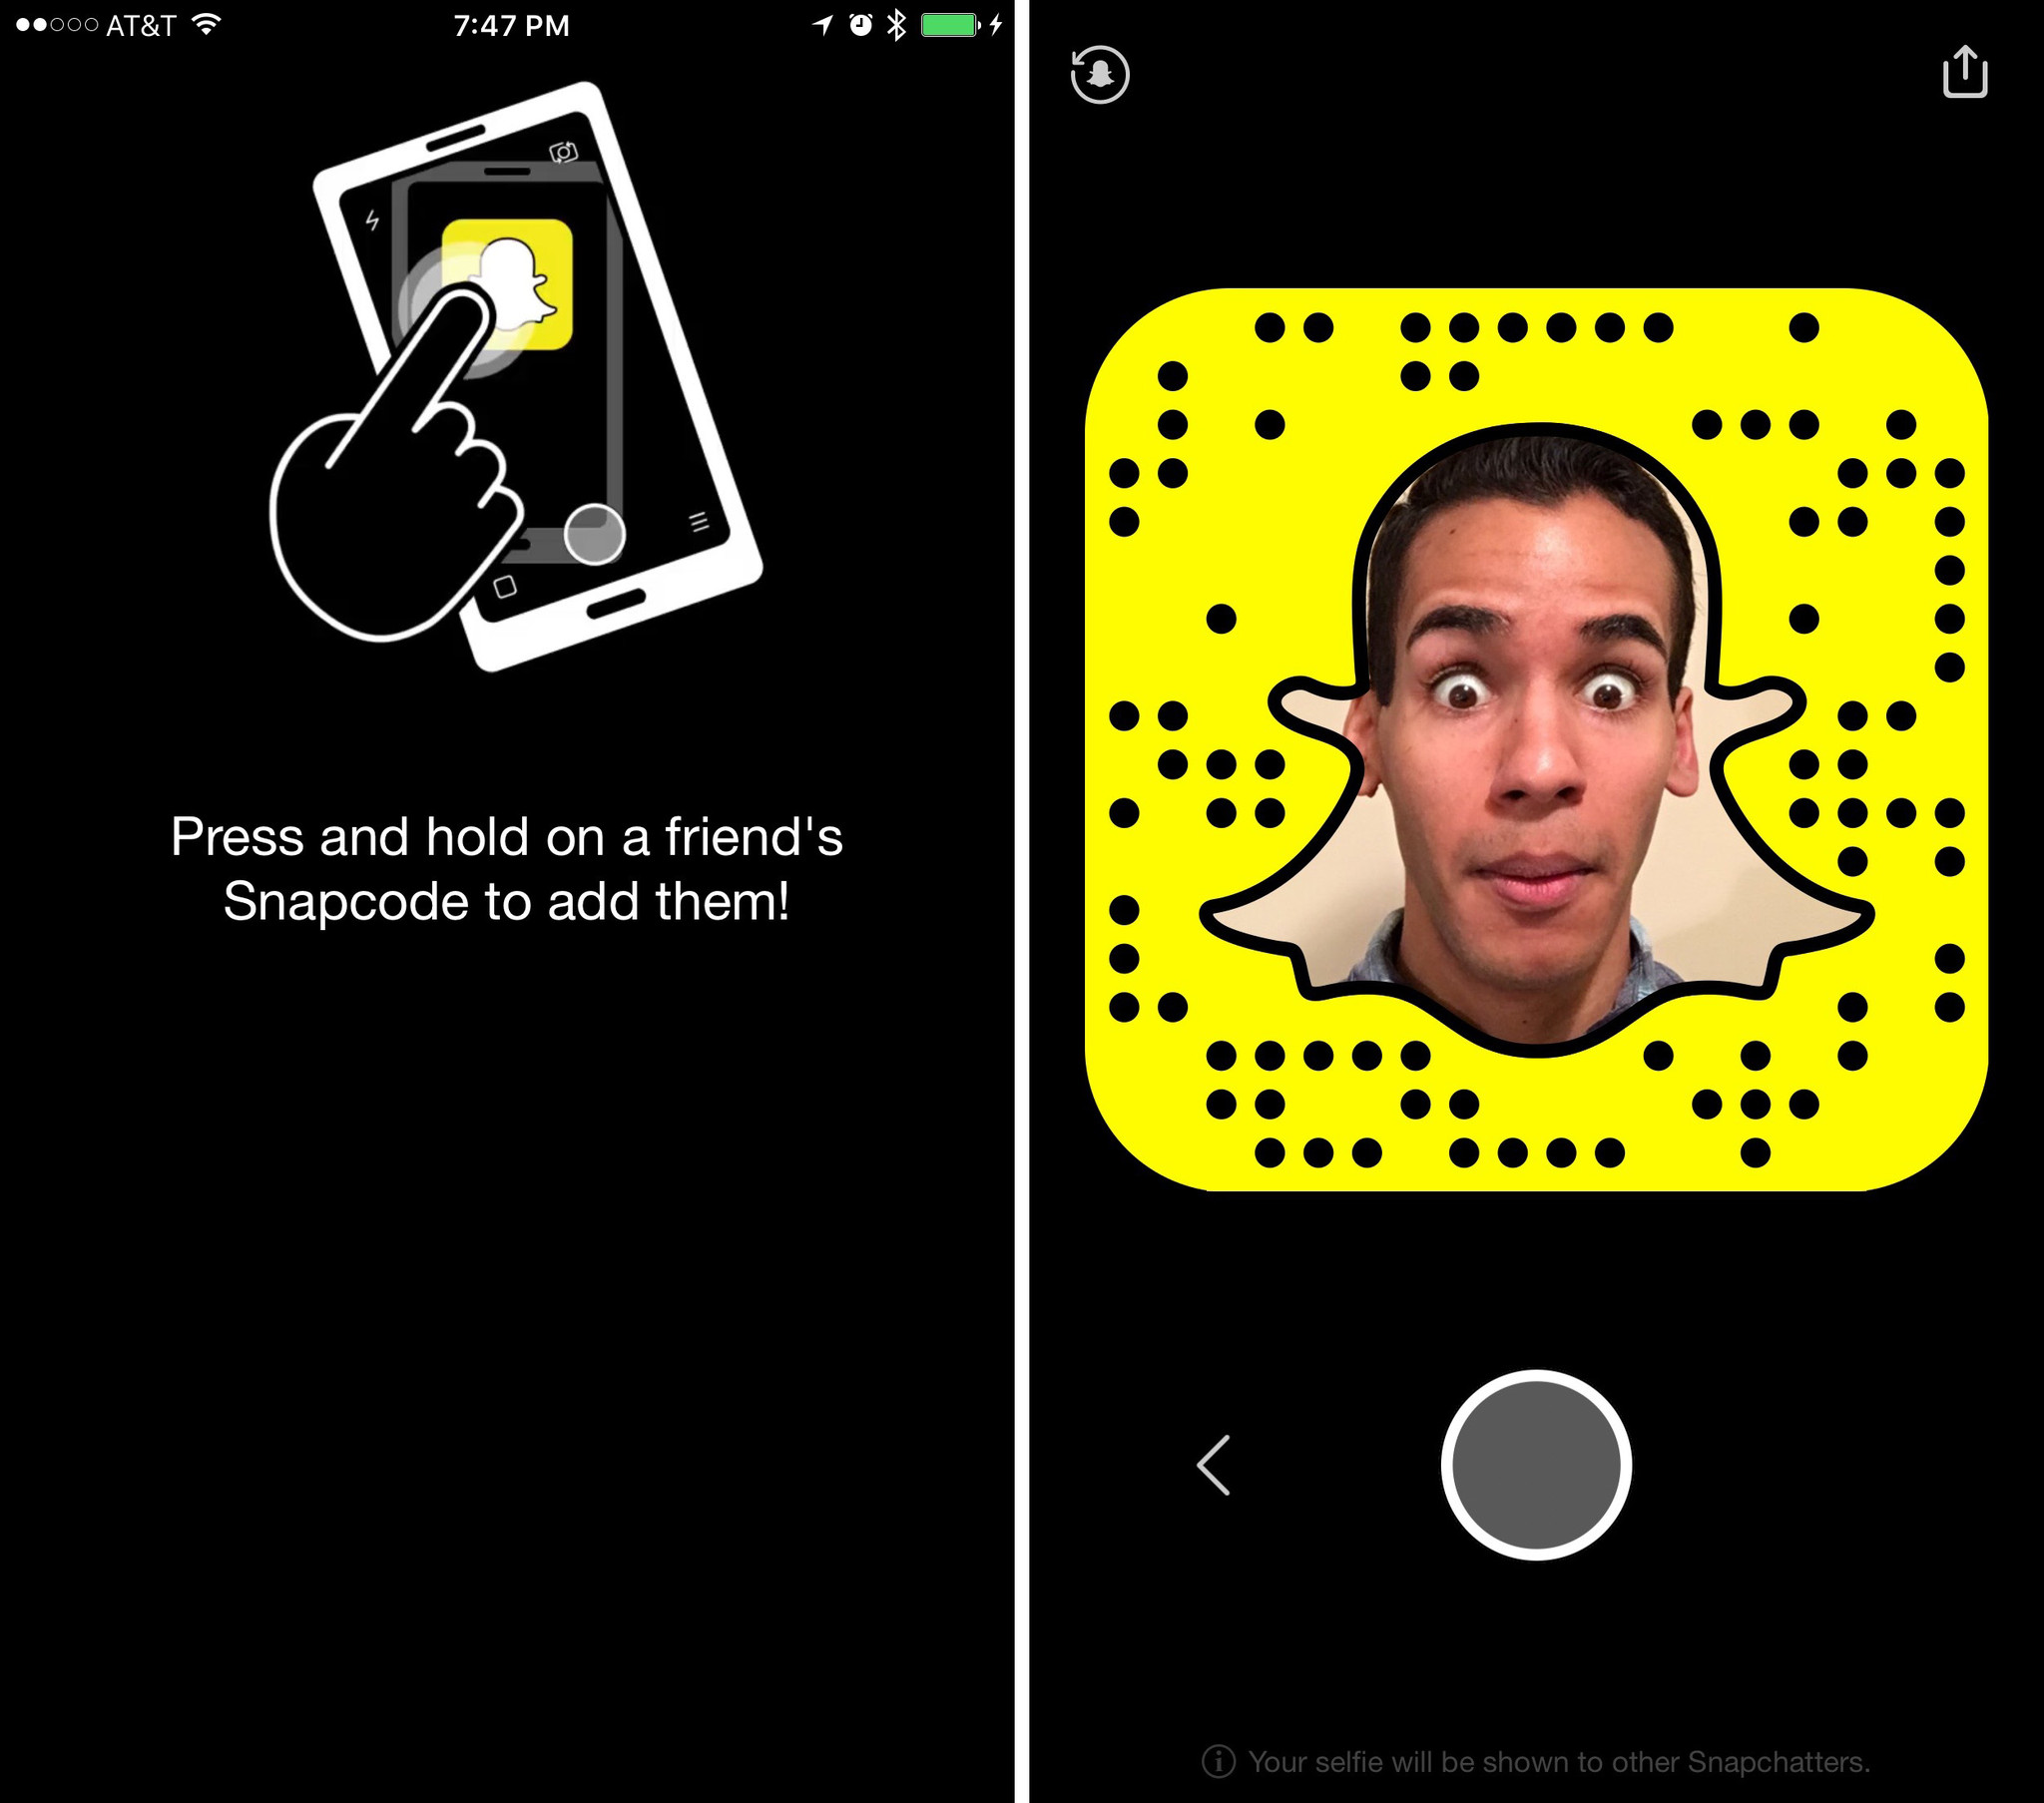 How to change settings and get more info in Snapchat | iMore